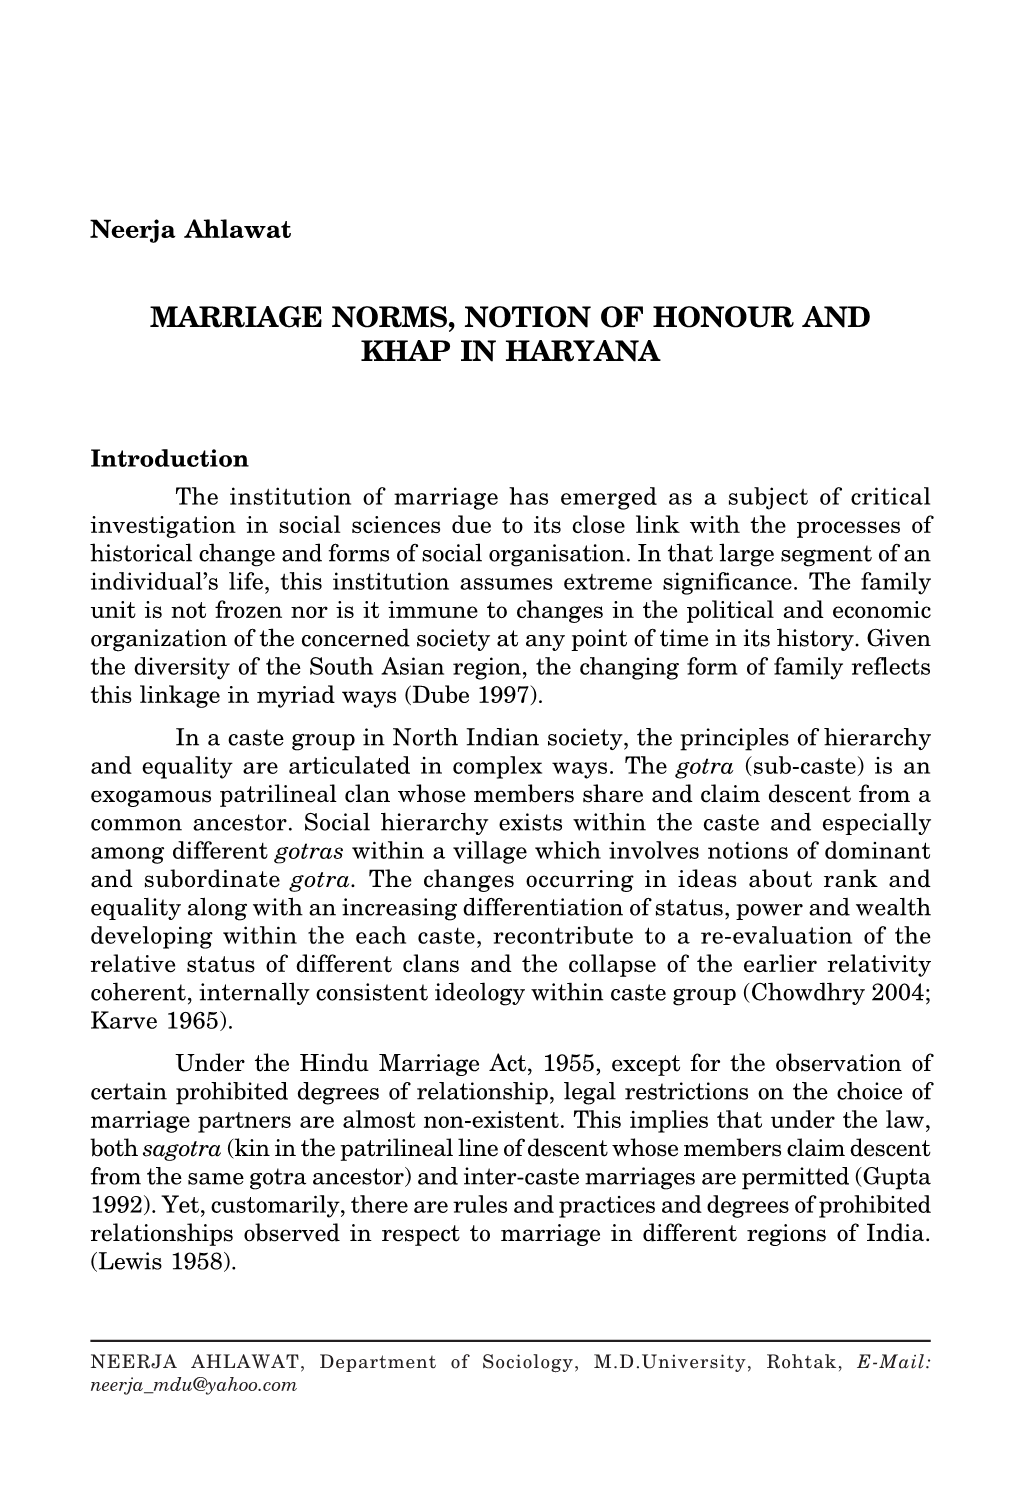 Marriage Norms, Notion of Honour and Khap in Haryana